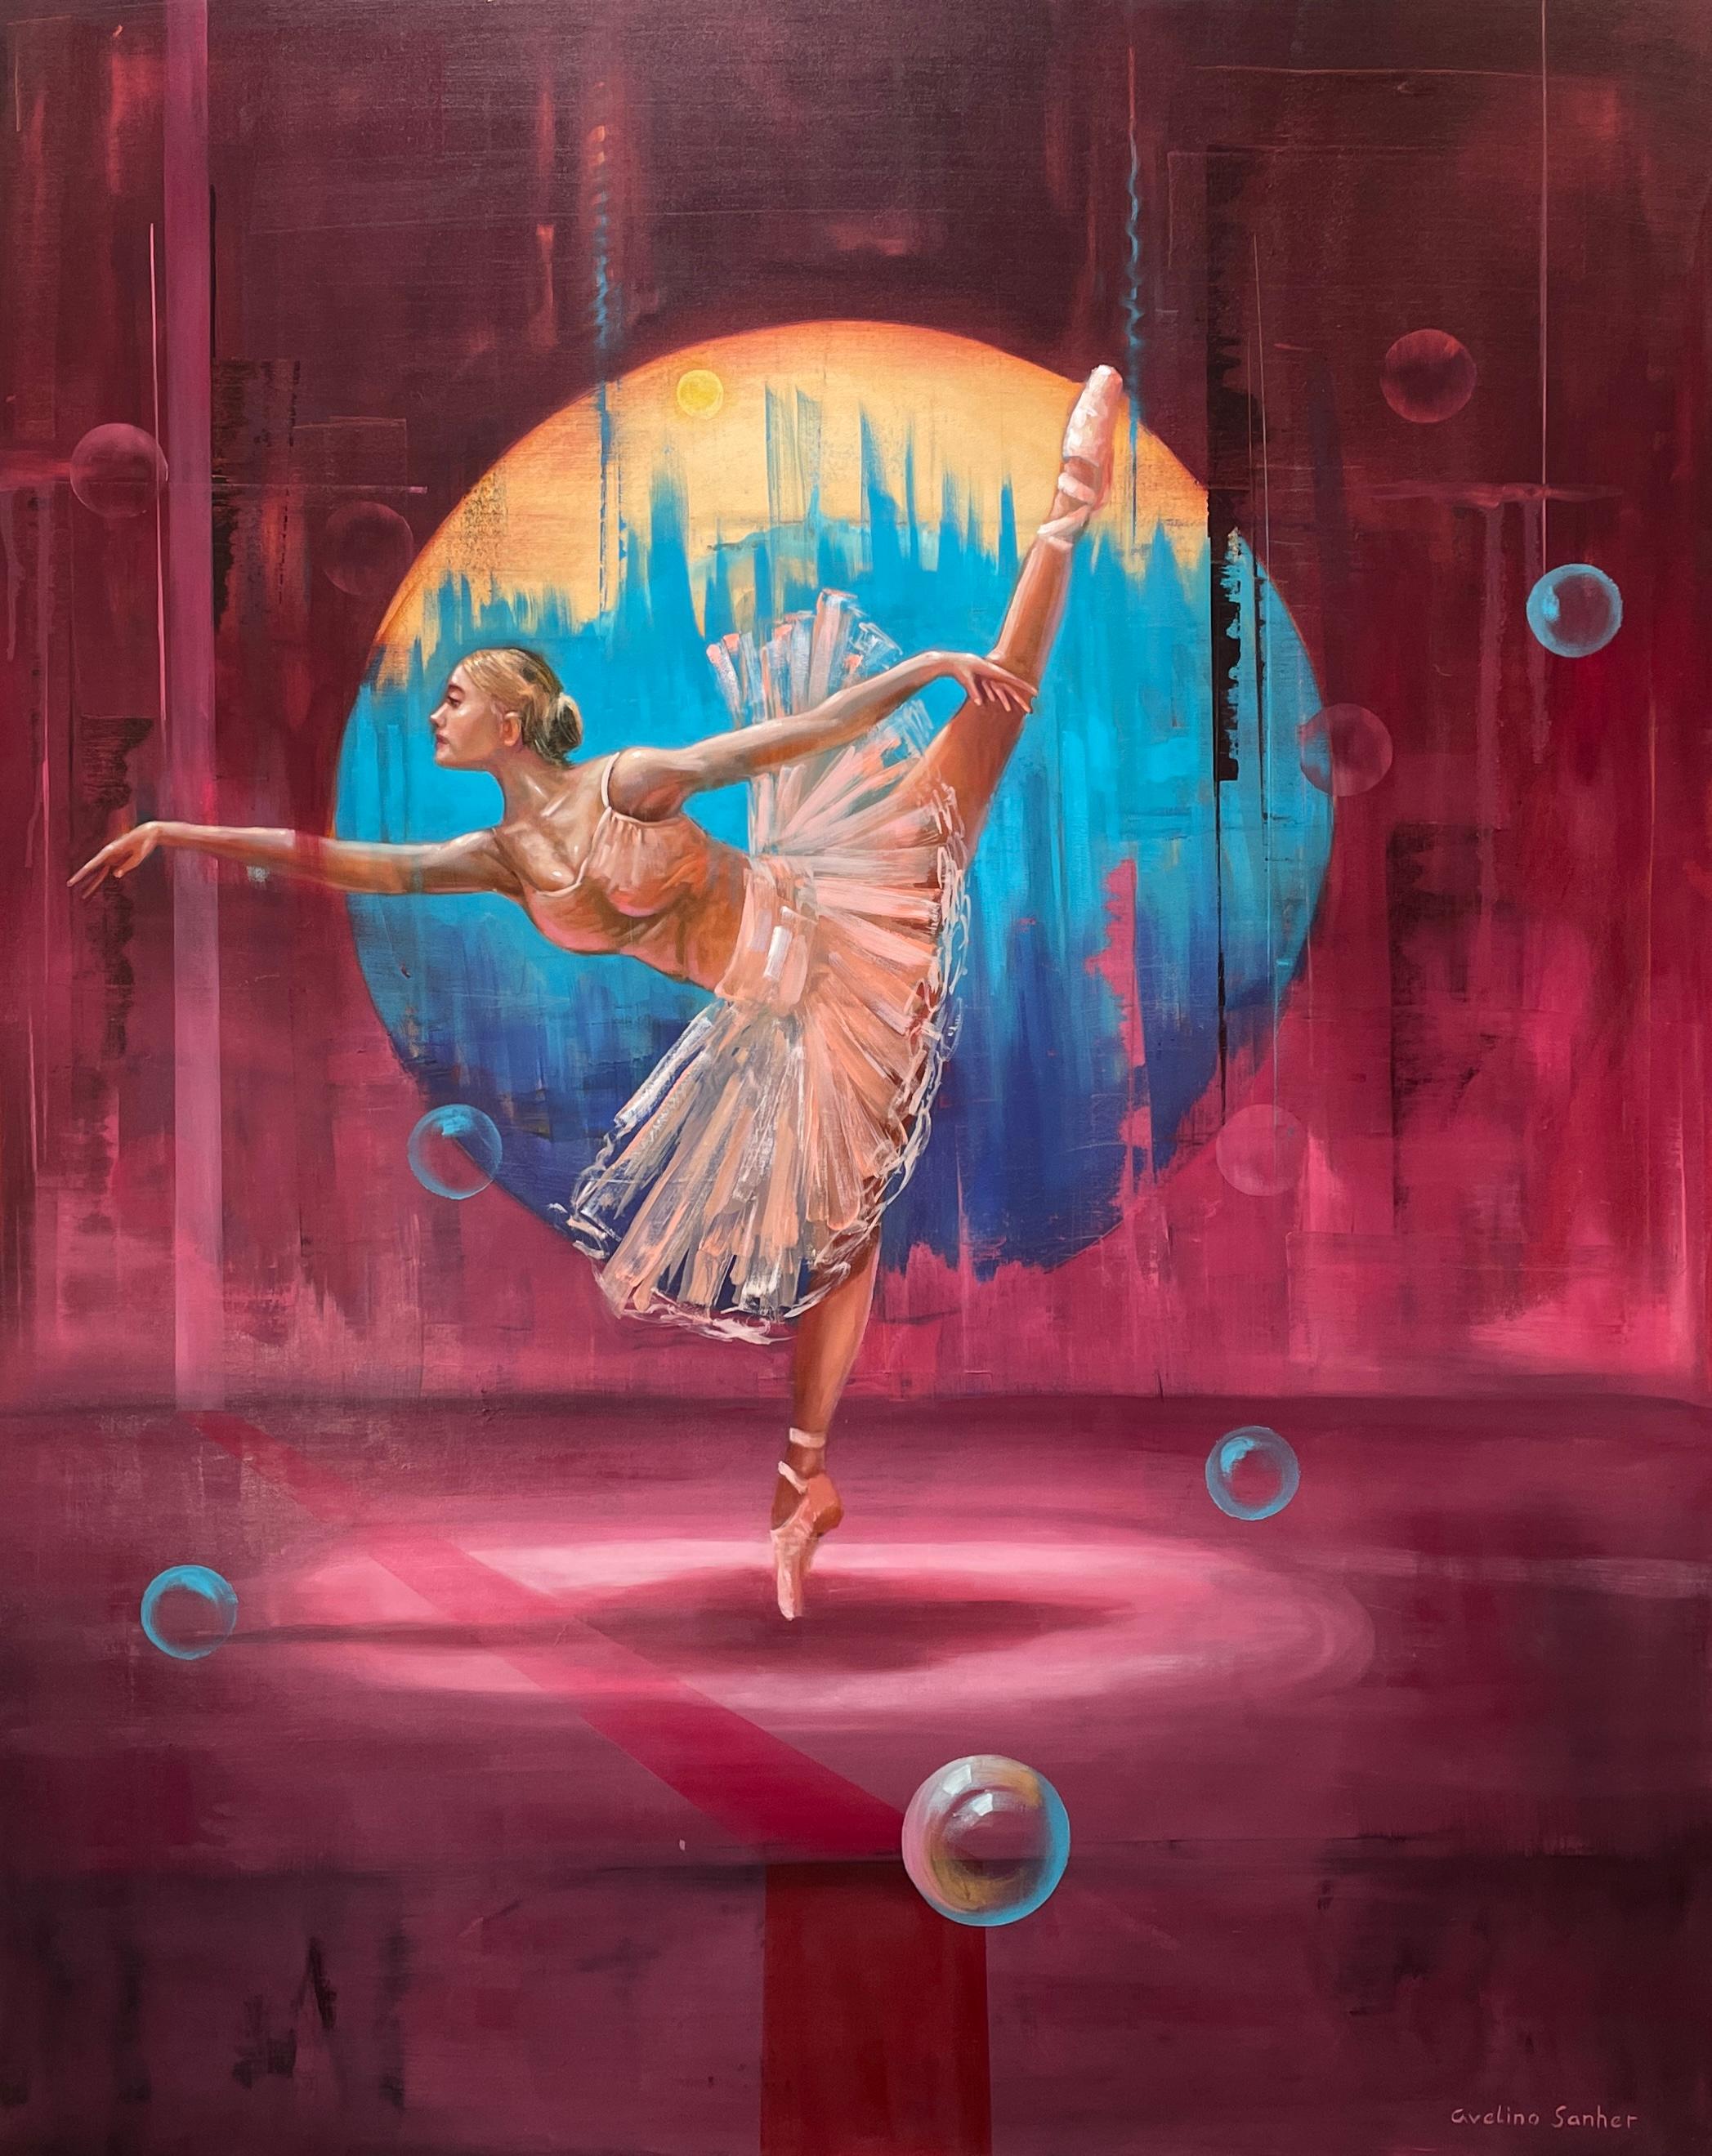 Avelino Sanher Figurative Painting - 'Rifletorre' - Lively Vibrant Ballet Dancer - Contemporary Figurative Abstract